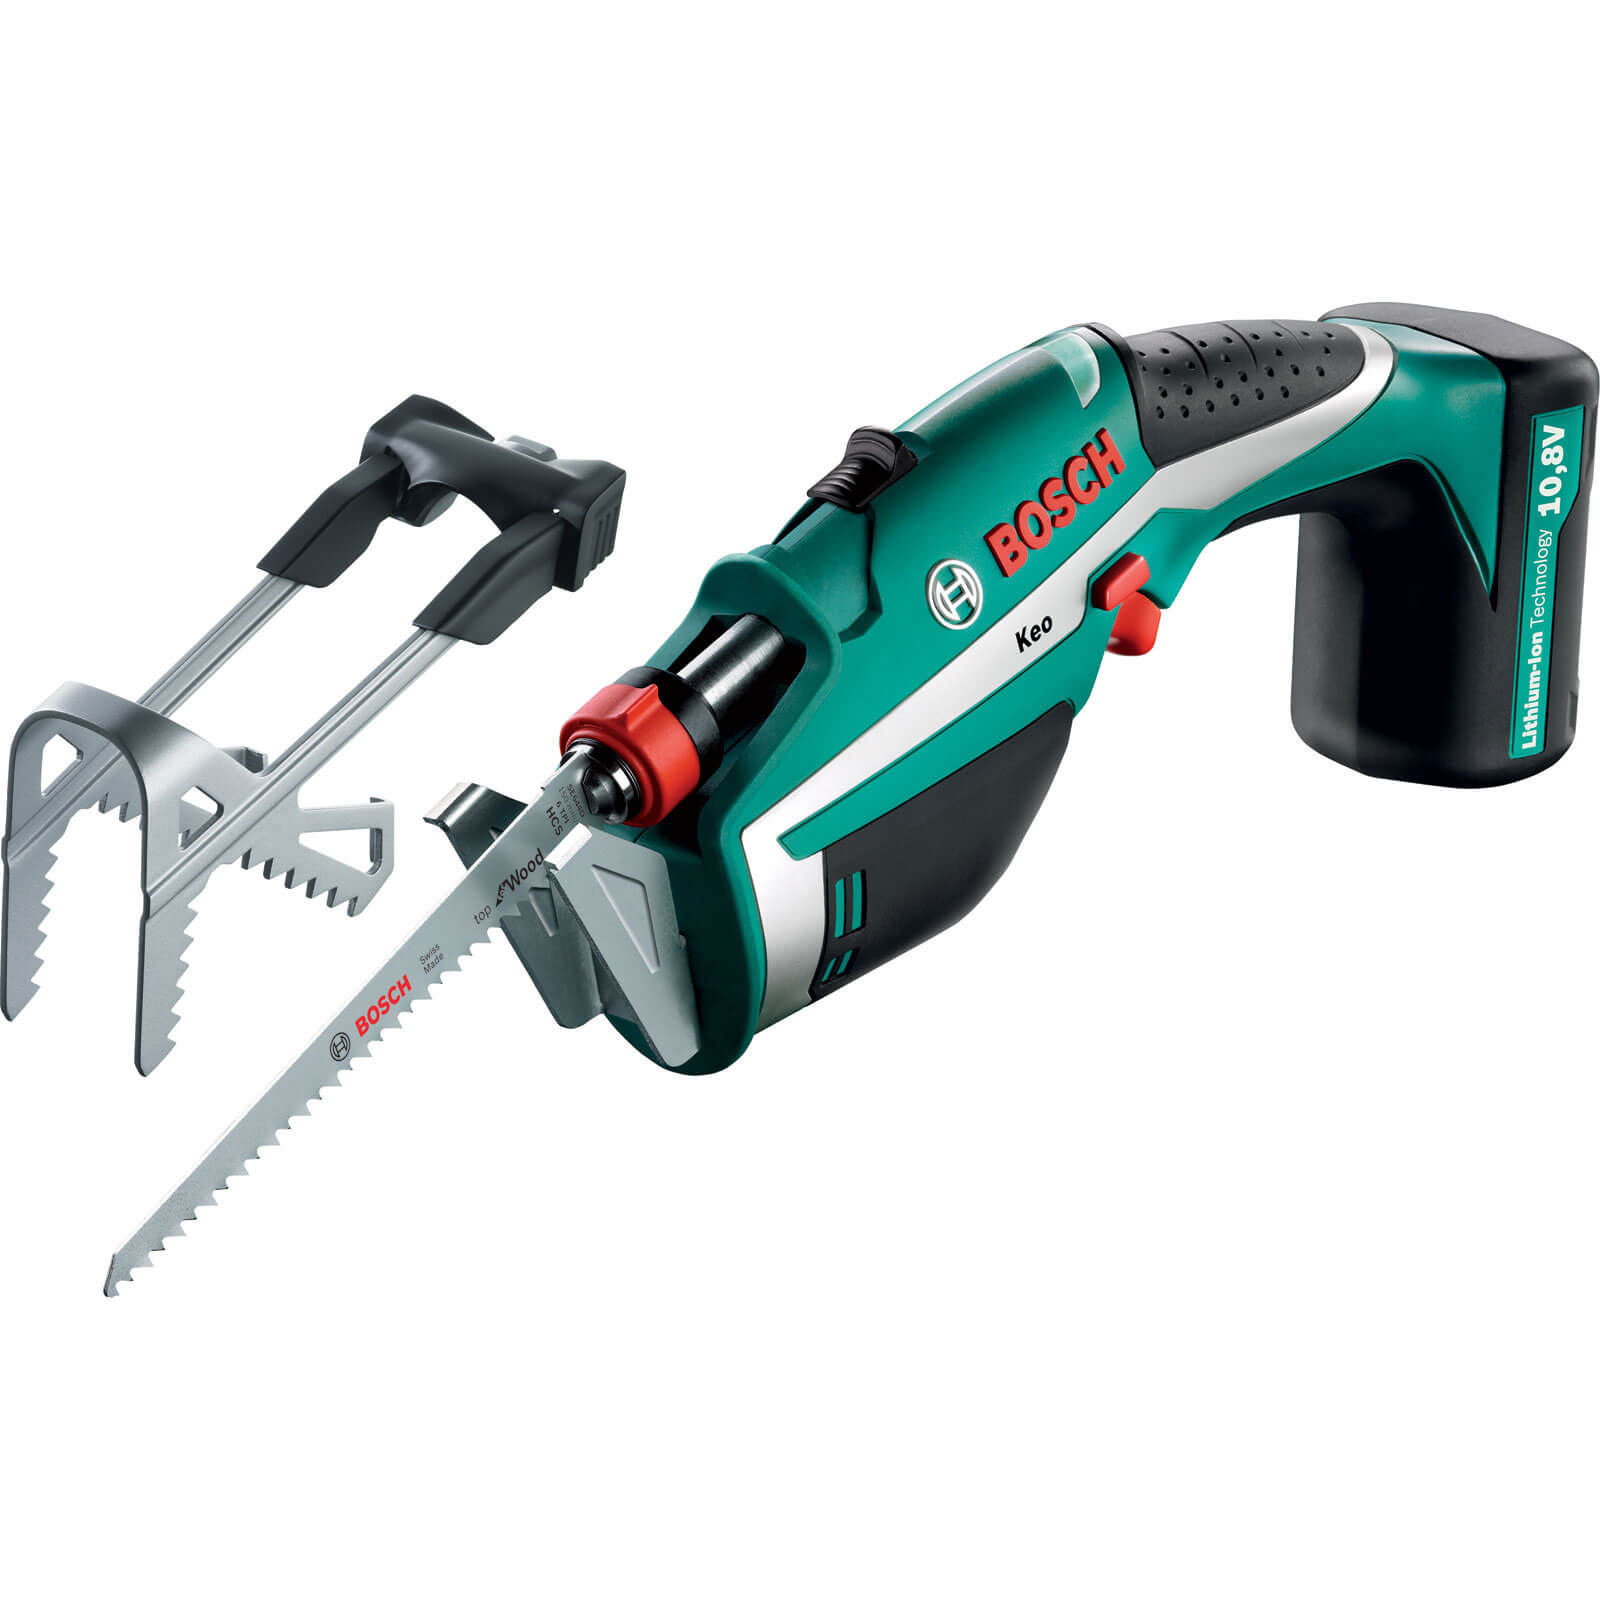 Bosch KEO 10.8v Cordless Reciprocating Garden Pruning Saw with Internal Lithium Ion Battery